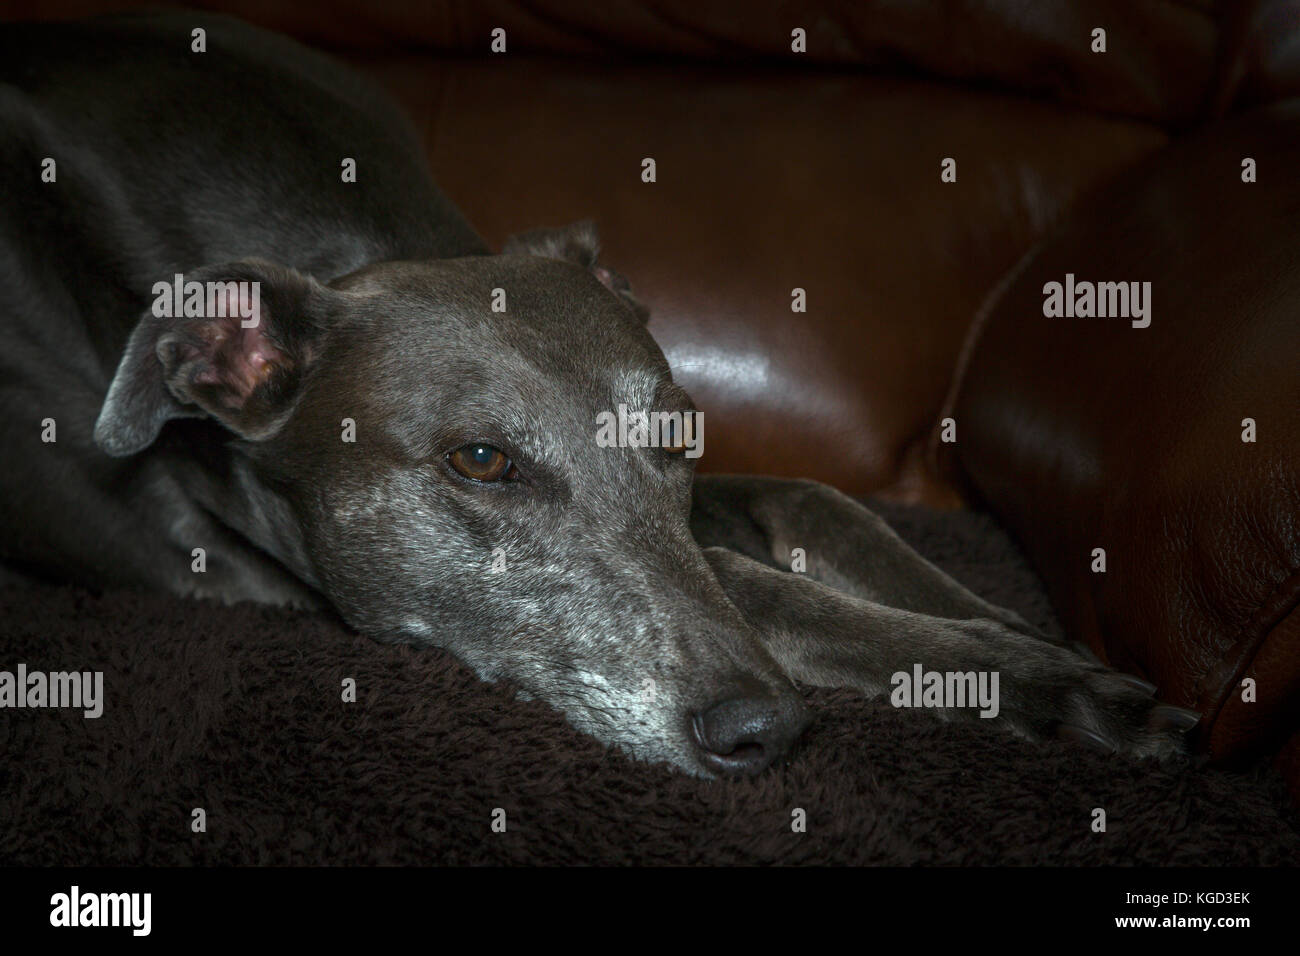 Greyhound relaxing on a sofa. Stock Photo